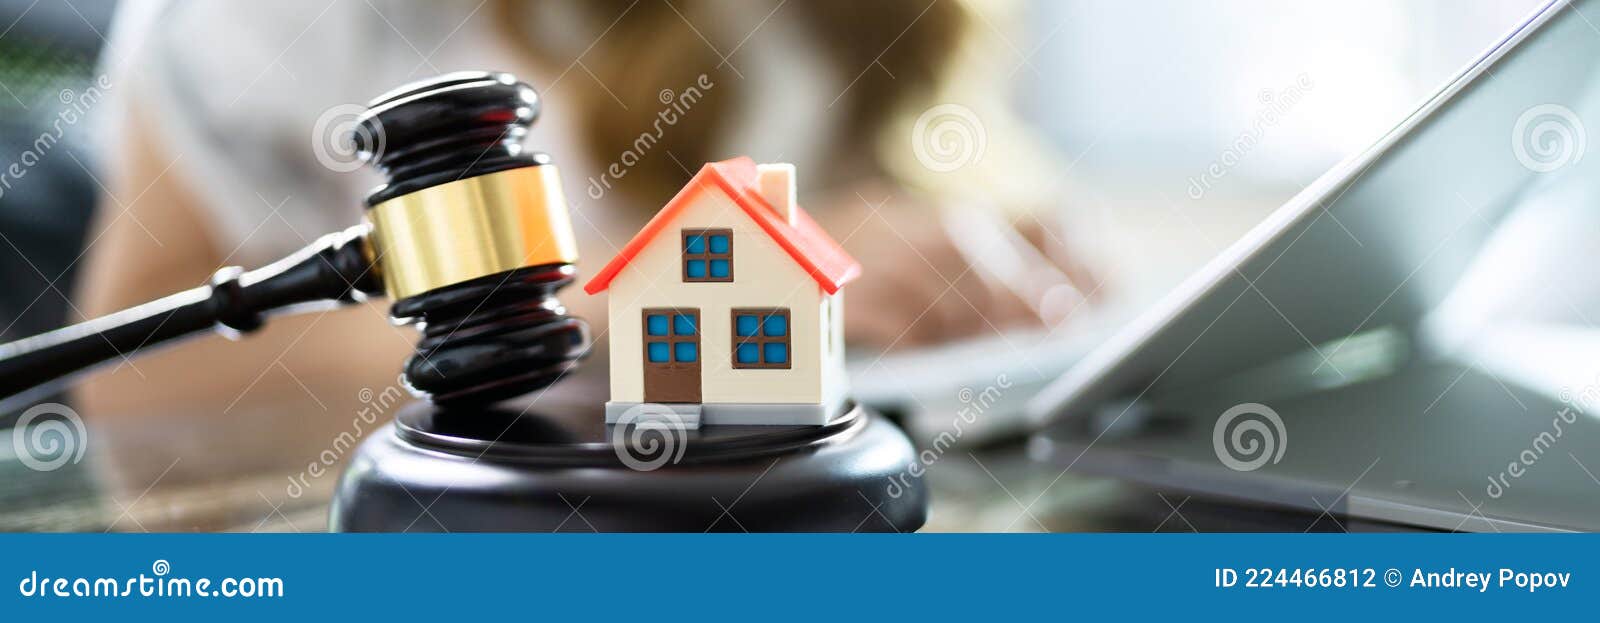 real estate arbitration law